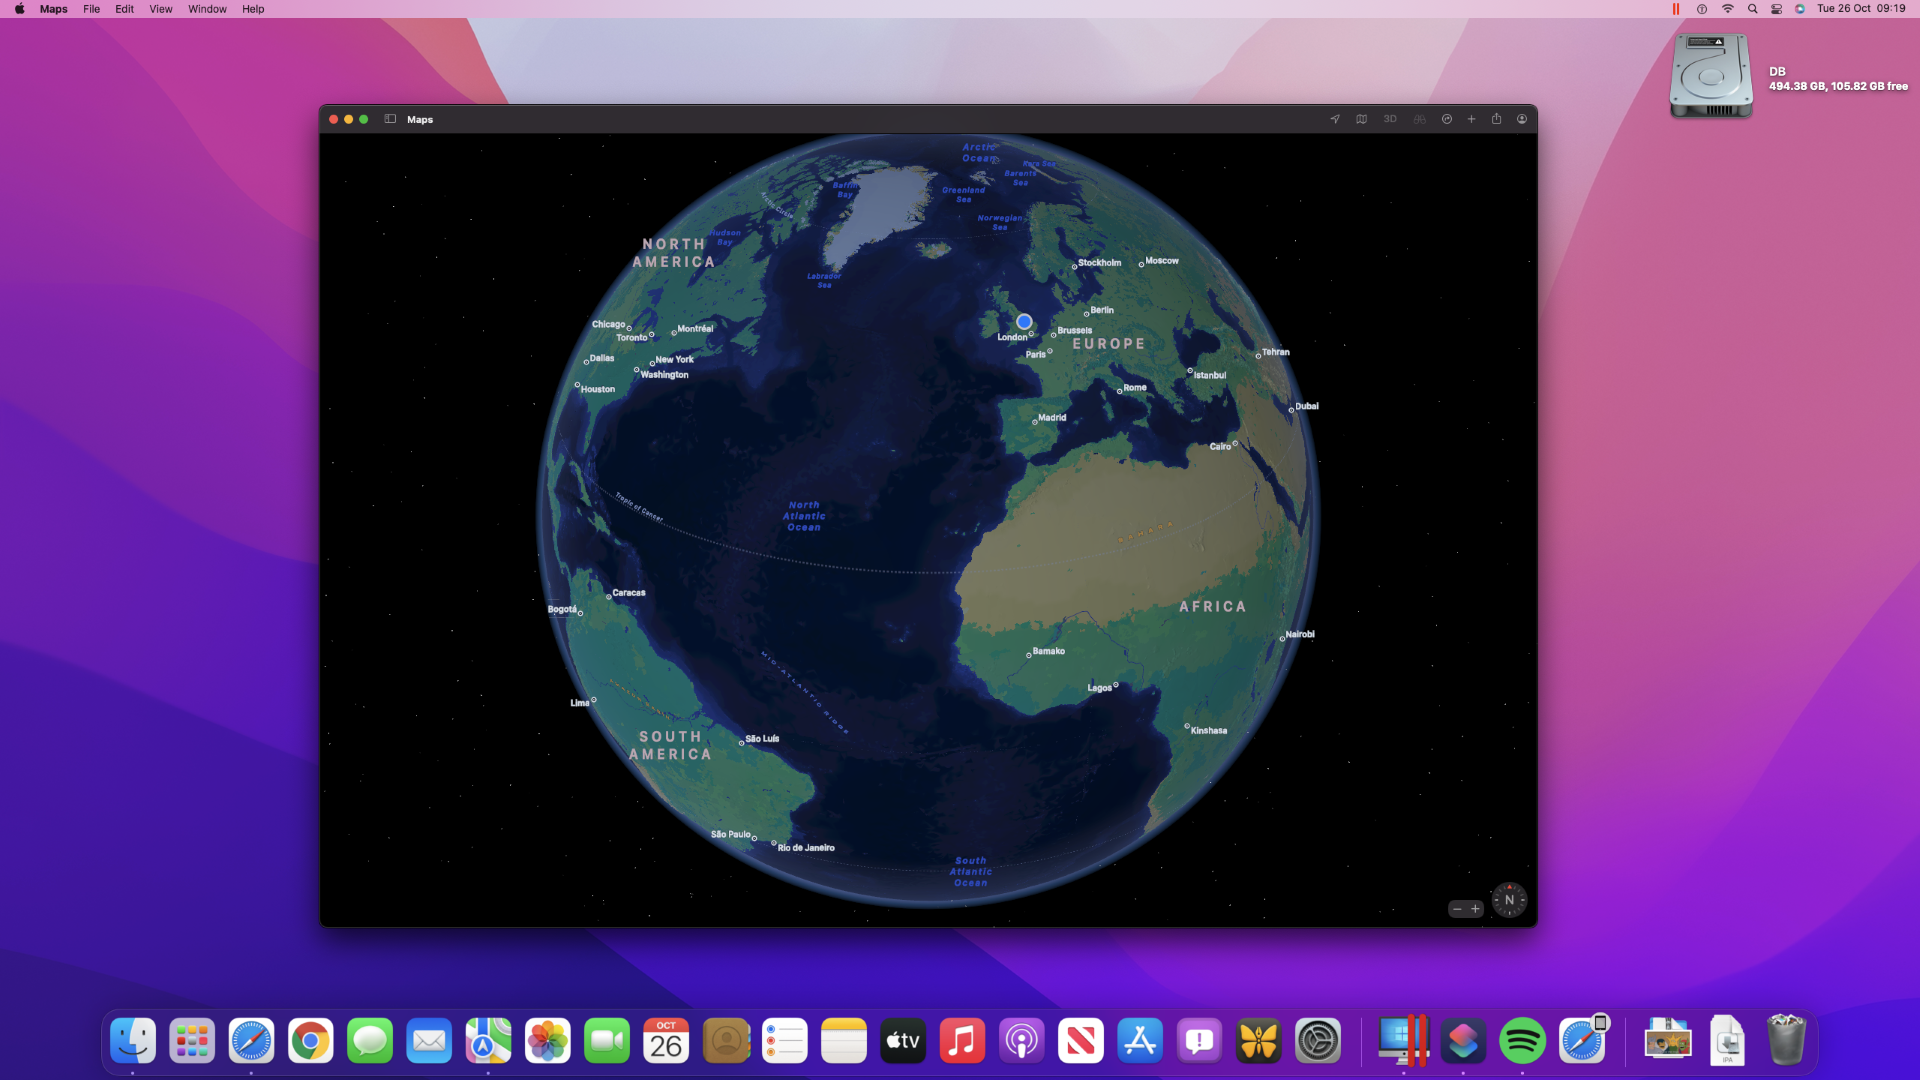 Maps in macOS 12 Monterey, showing the new Globe feature